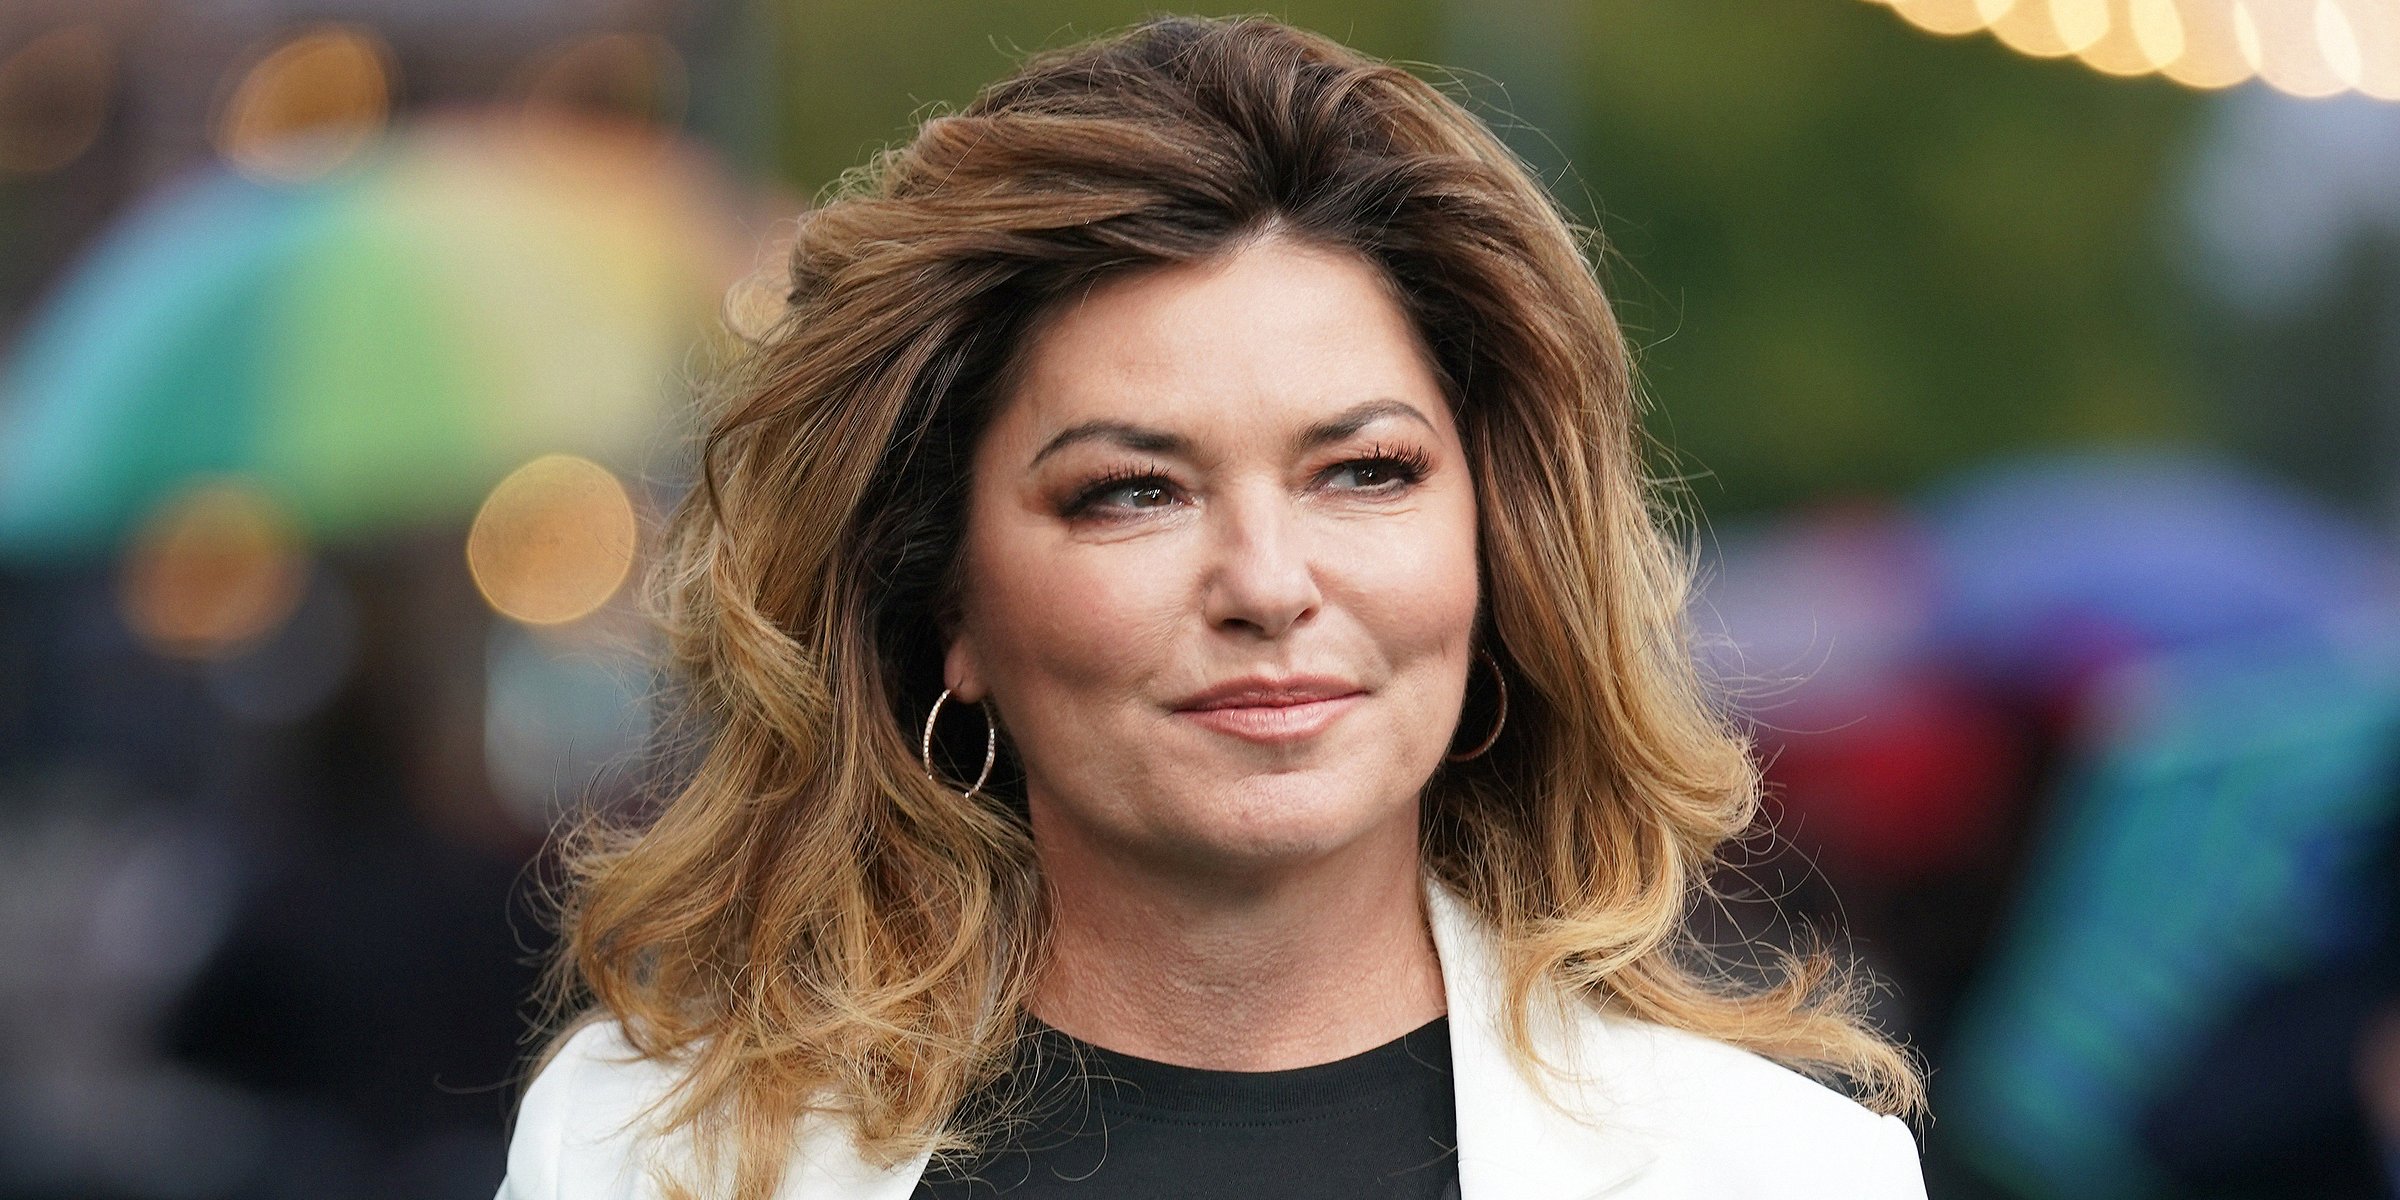 Shania Twain | Source: Getty Images